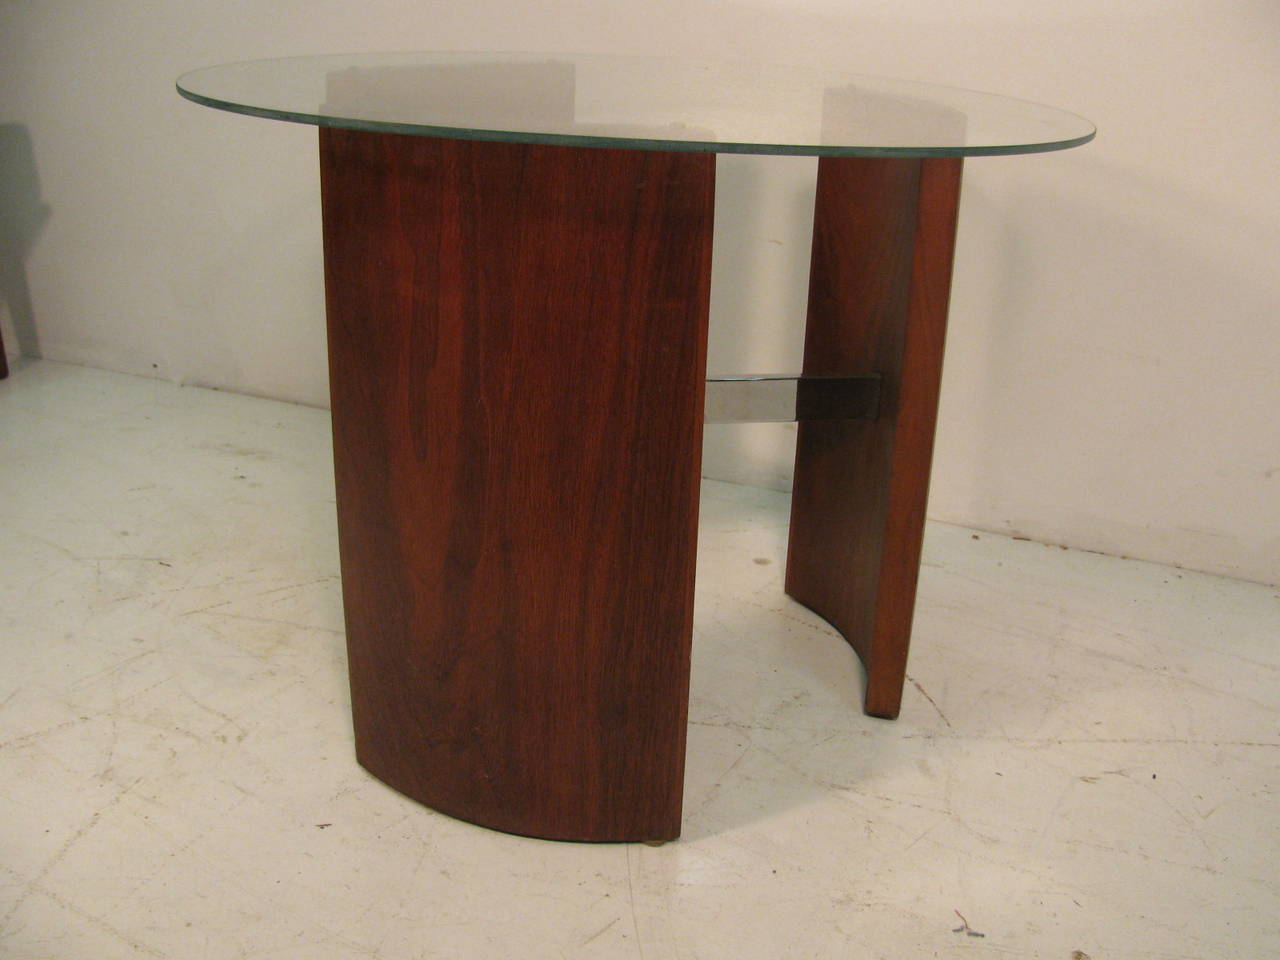 Lacquered Midcentury Side or Cocktail Table, Radius by Vladimir Kagan